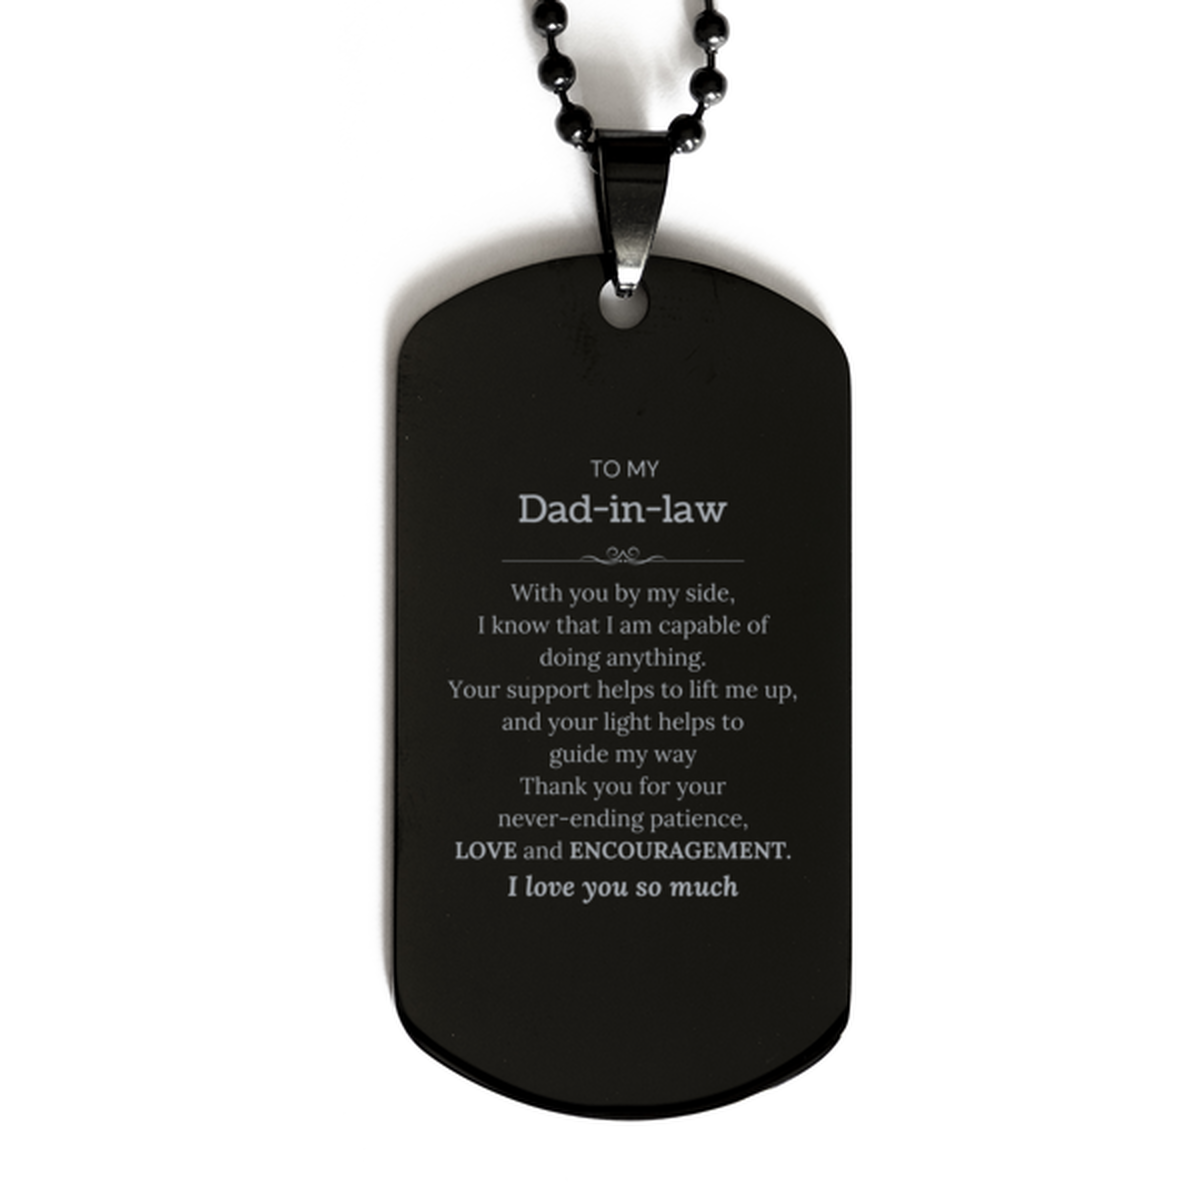 Appreciation Dad-in-law Black Dog Tag Gifts, To My Dad-in-law Birthday Christmas Wedding Keepsake Gifts for Dad-in-law With you by my side, I know that I am capable of doing anything. I love you so much